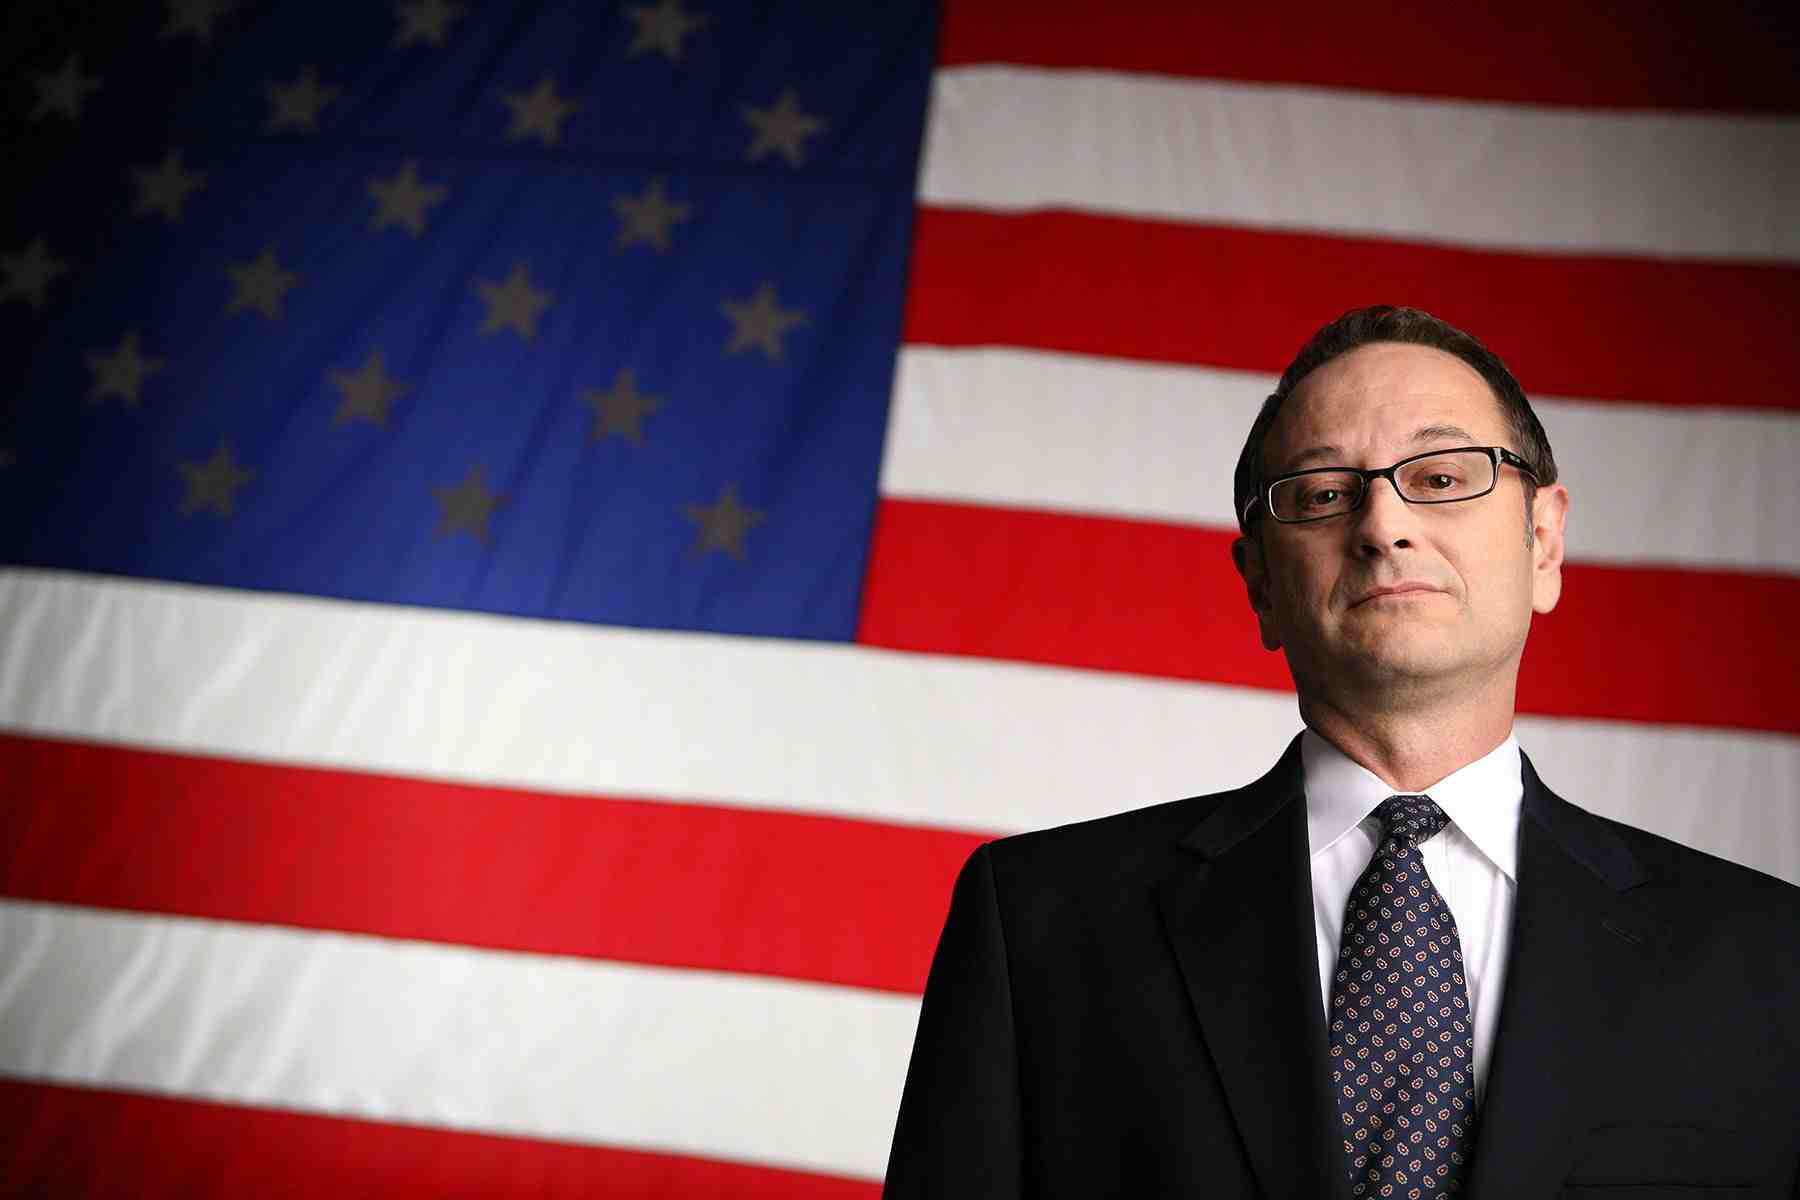 Unwavering Commitment: Corporate Headshot of VA Doctor with Giant American Flag